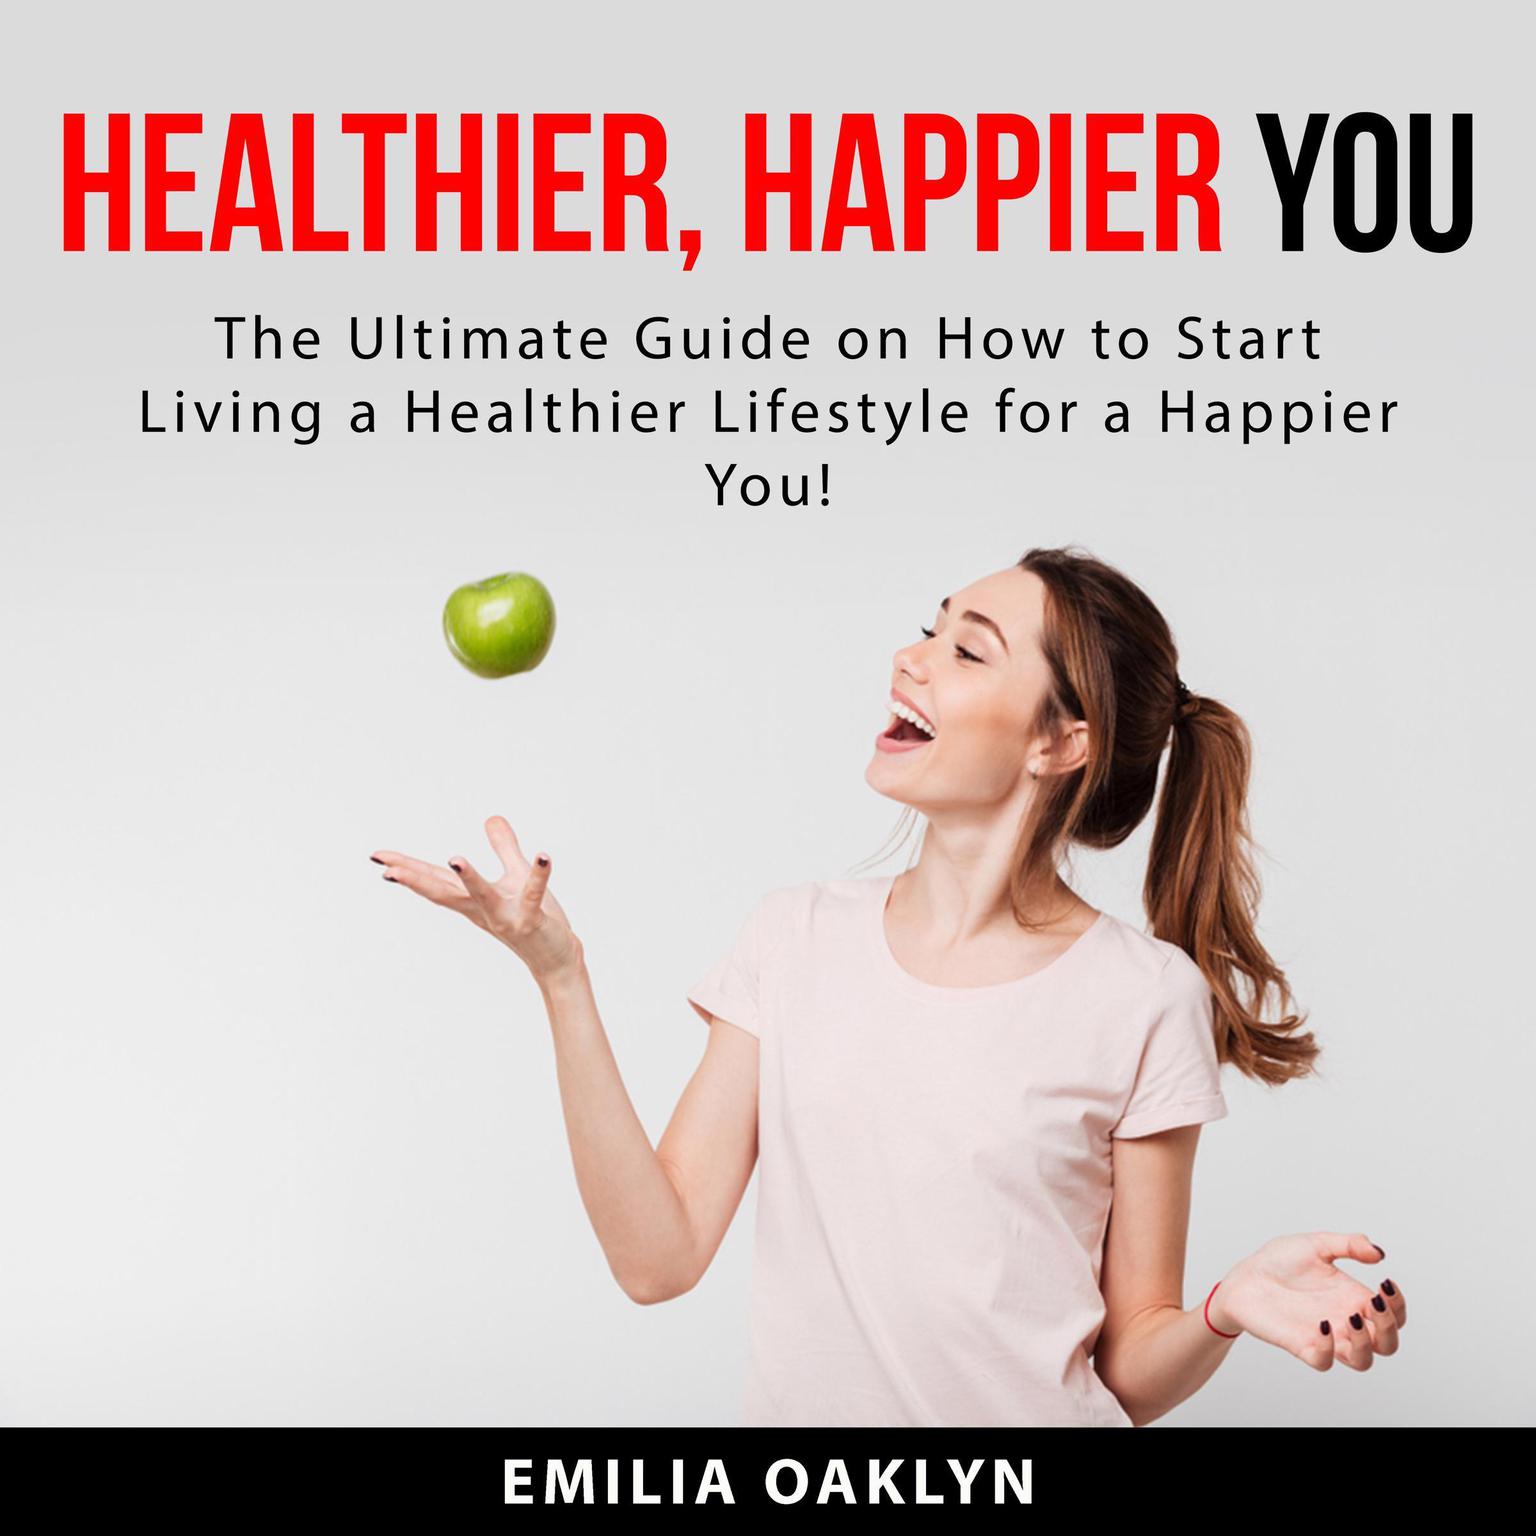 Healthier, Happier You: The Ultimate Guide on How to Start Living a Healthier Lifestyle for a Happier You! Audiobook, by Emilia Oaklyn